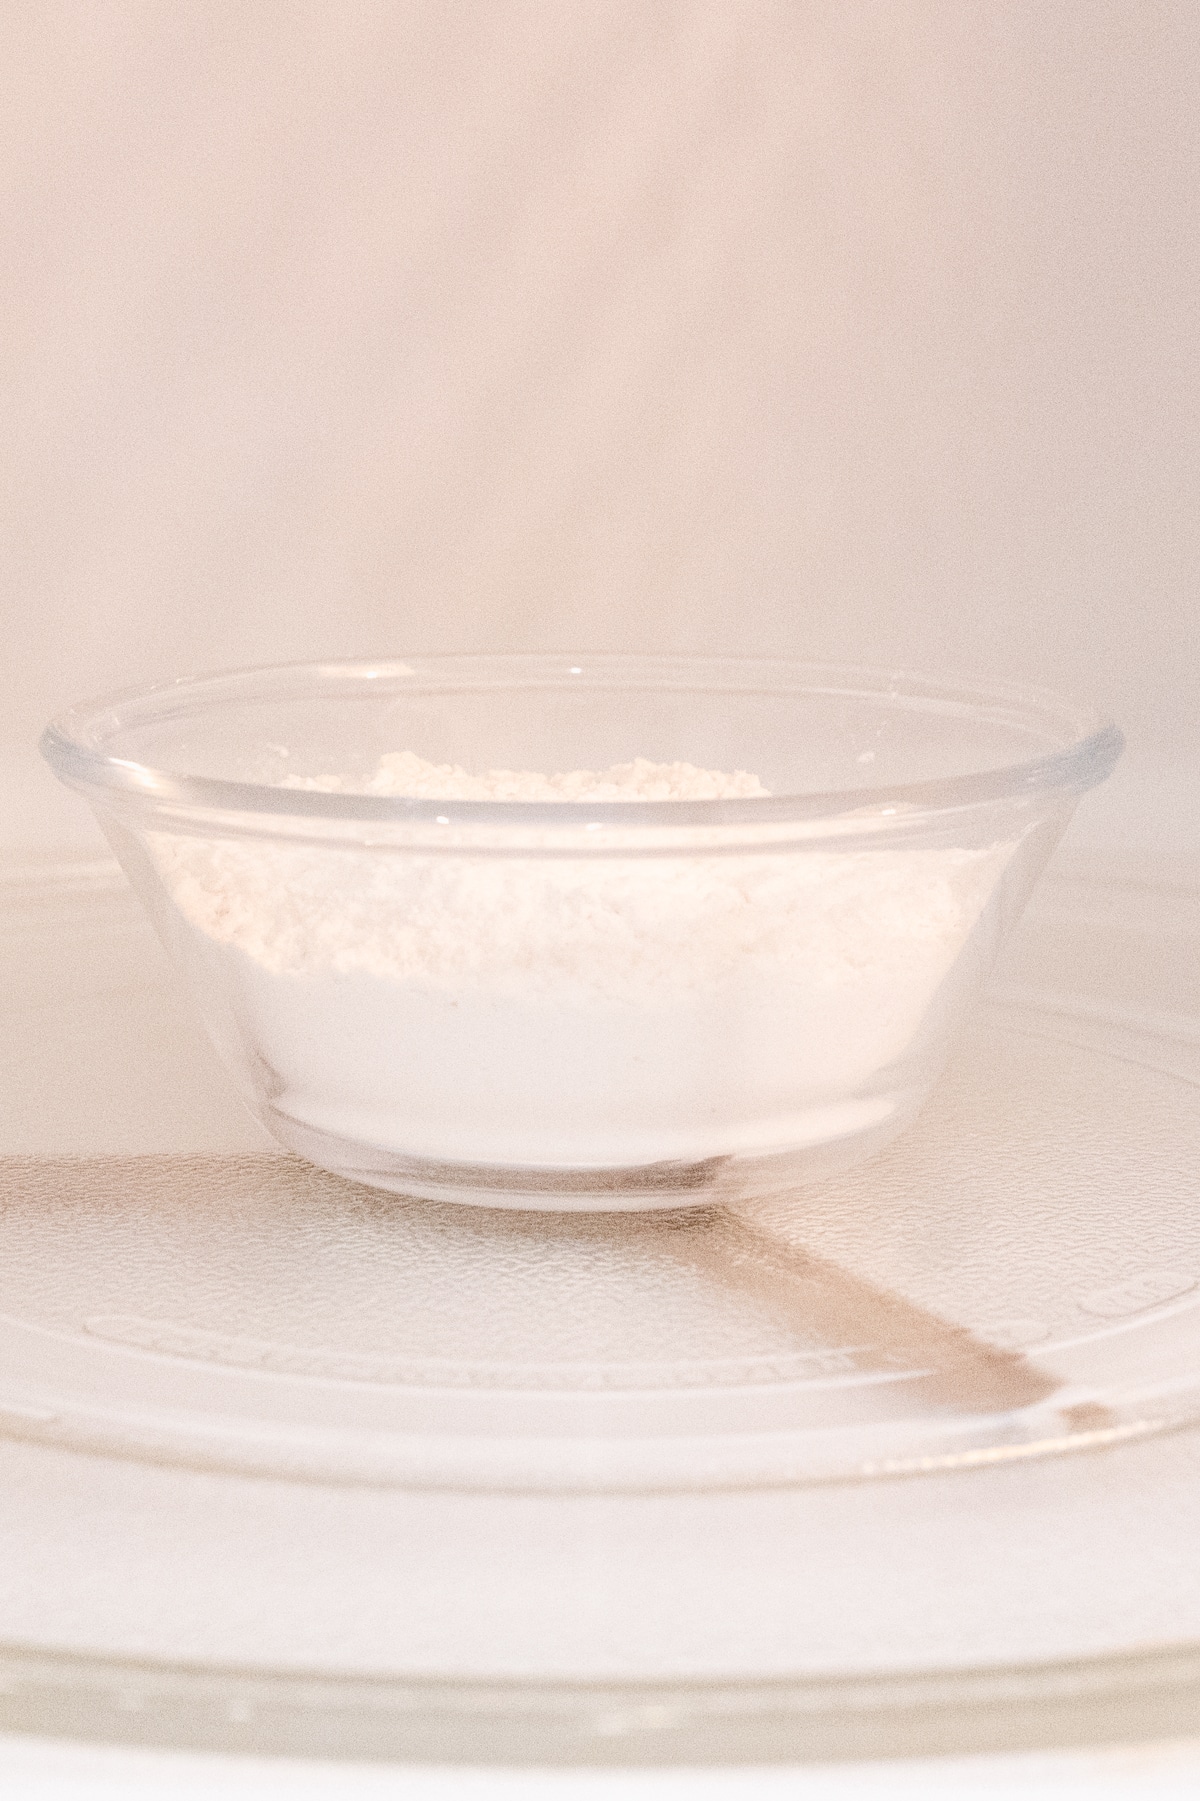 Close up view of flour in a microwavable bowl in the microwave.